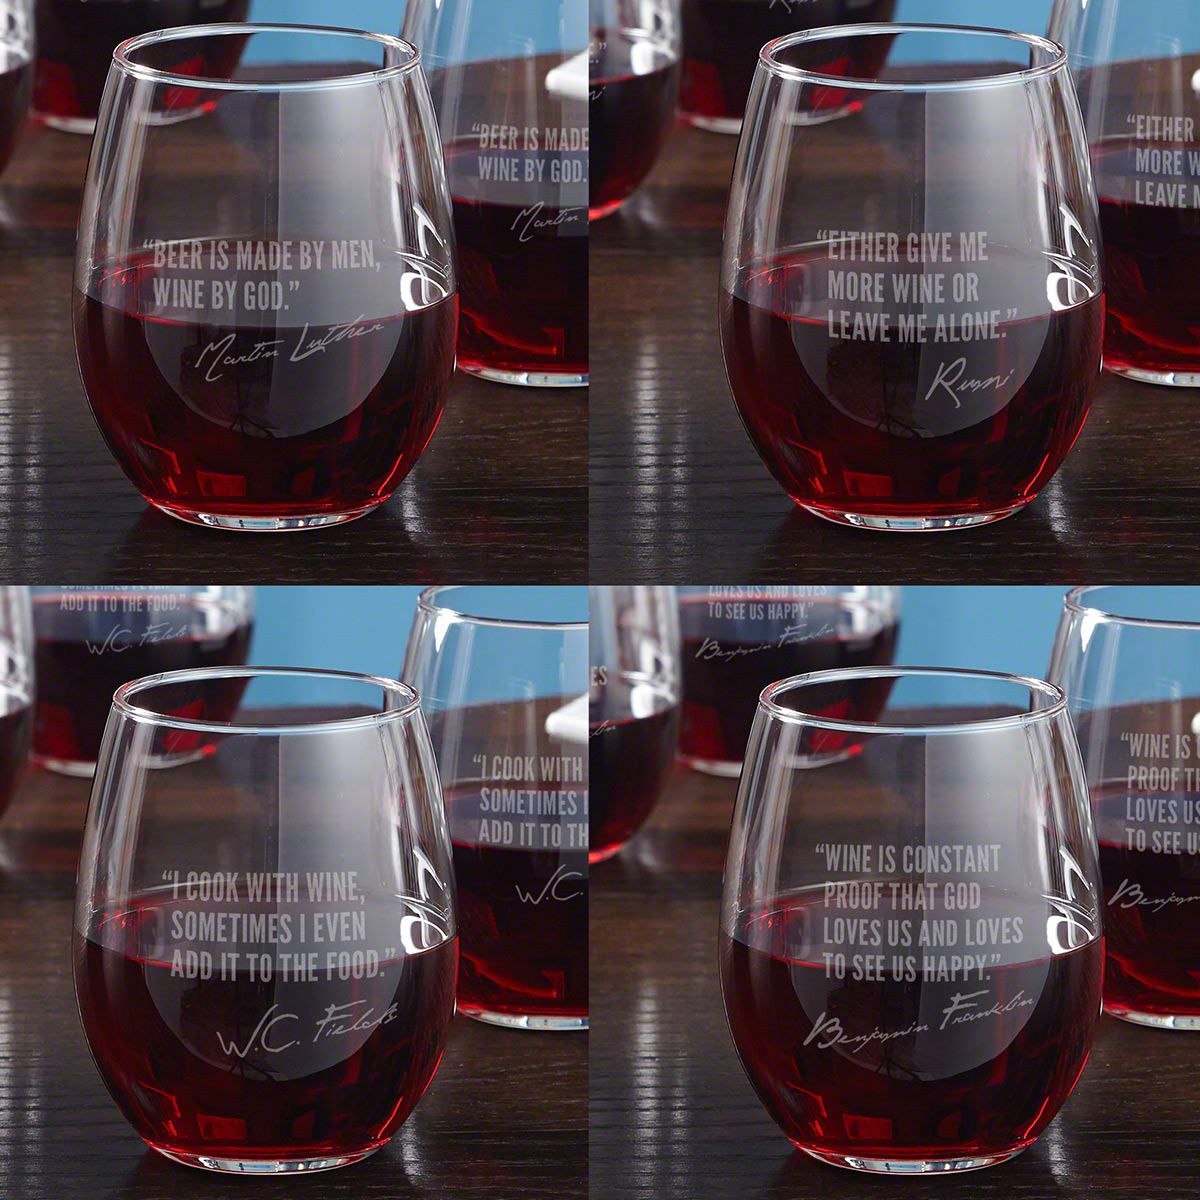 https://images.homewetbar.com/media/catalog/product/f/a/famous-men-of-wine-etched-stemless-glass-p.jpg?store=default&image-type=image